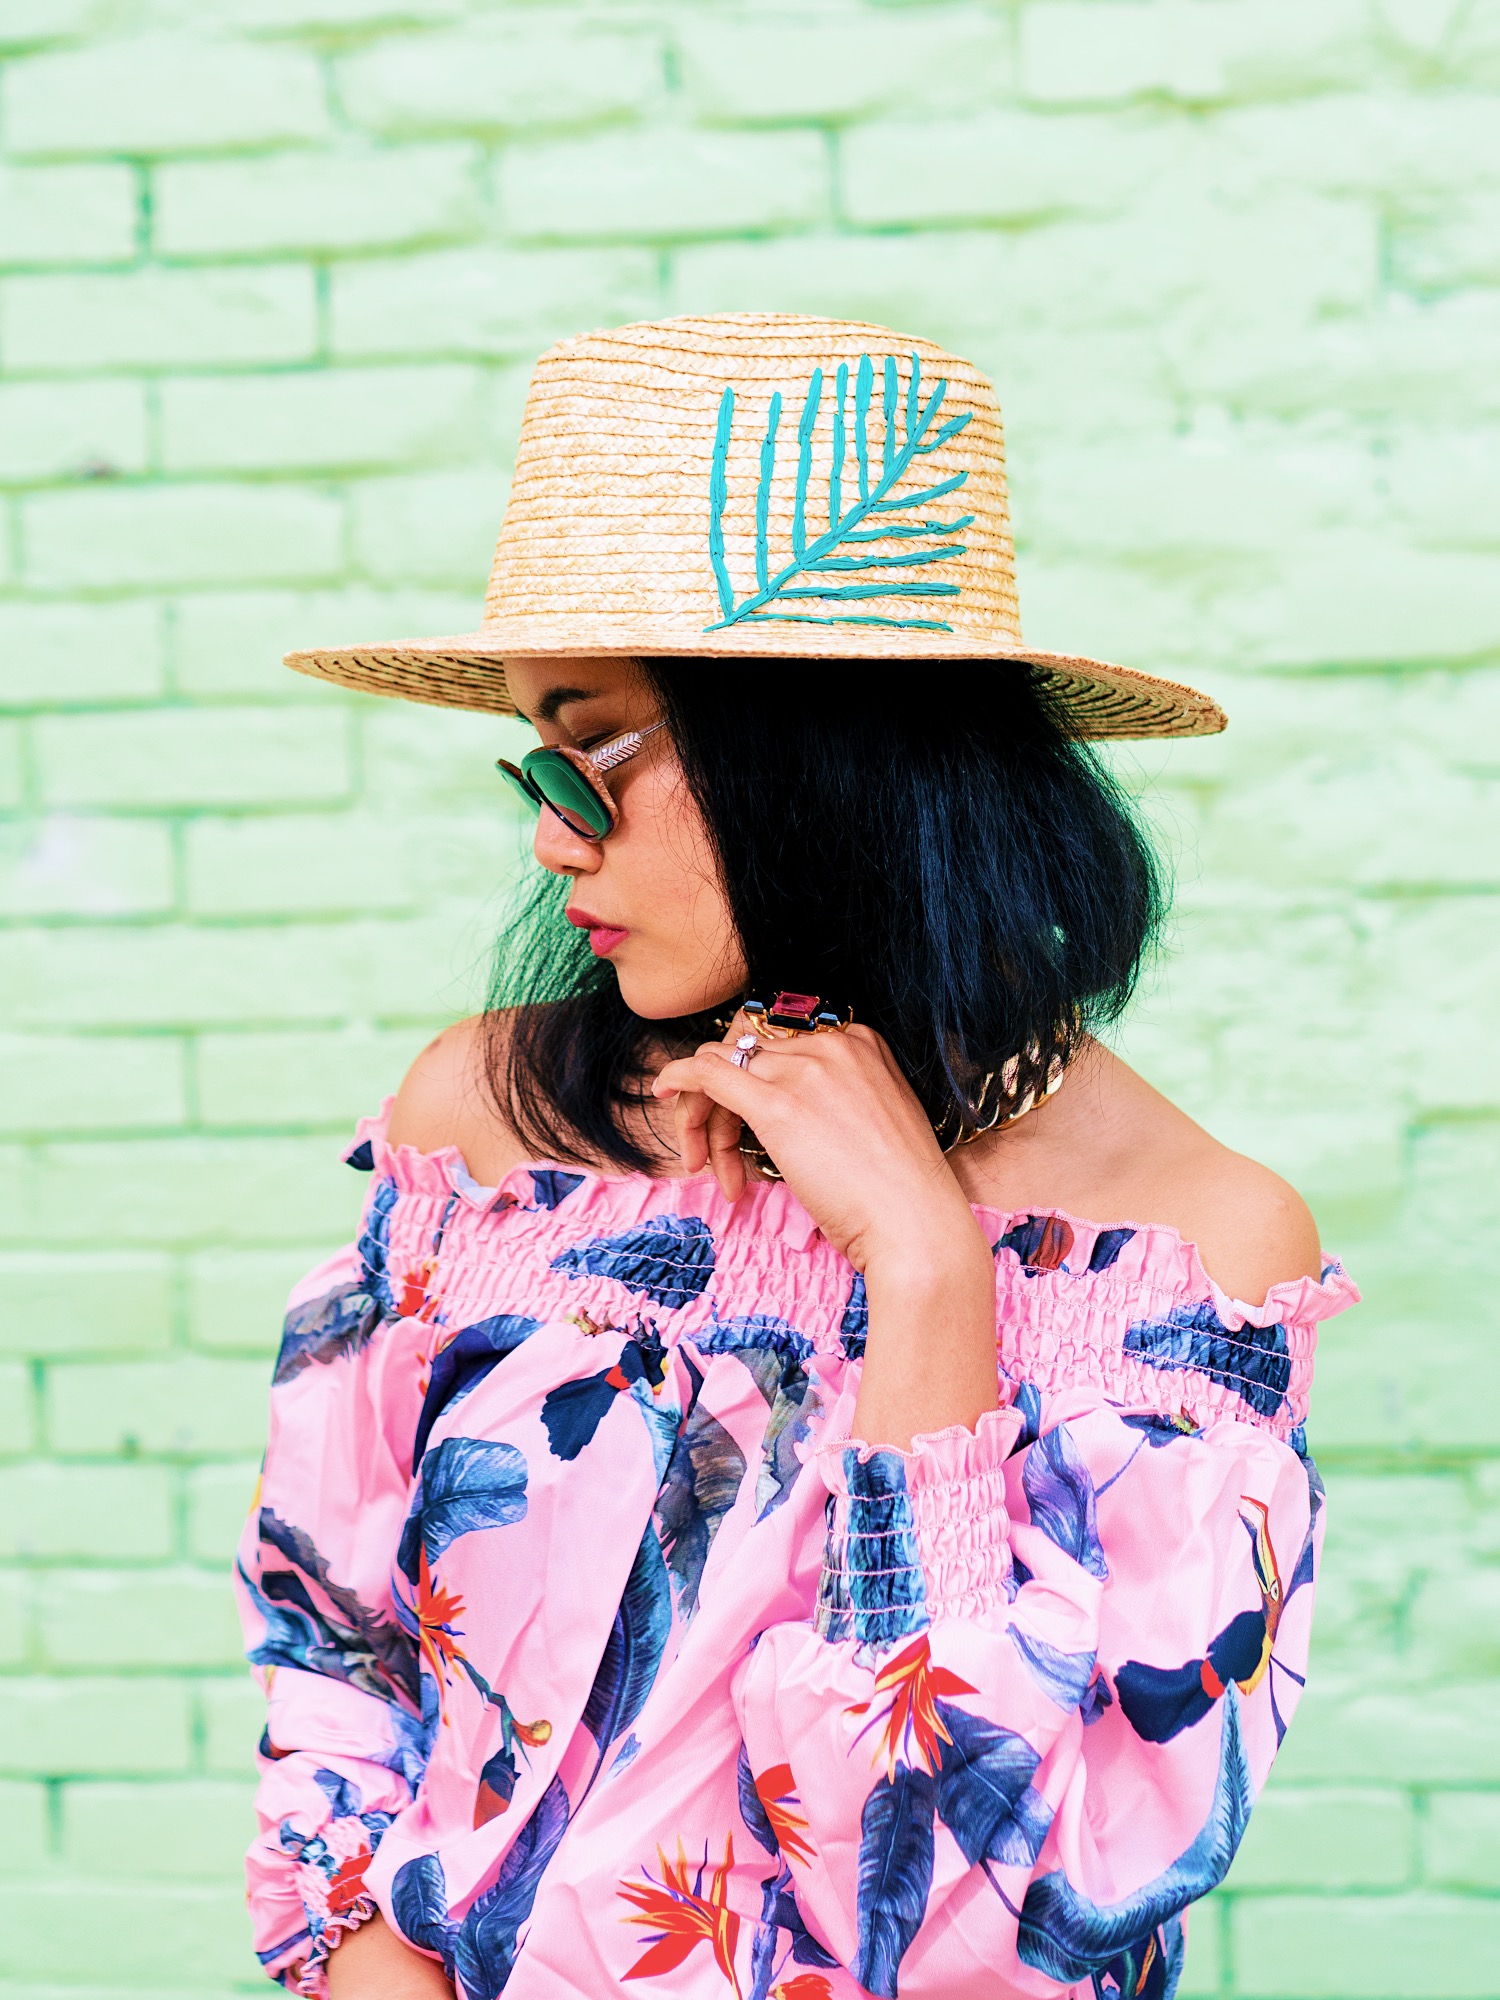 nanphanita is wearing SDHC womens wheat straw palm fedora hat with tropical printed outfit